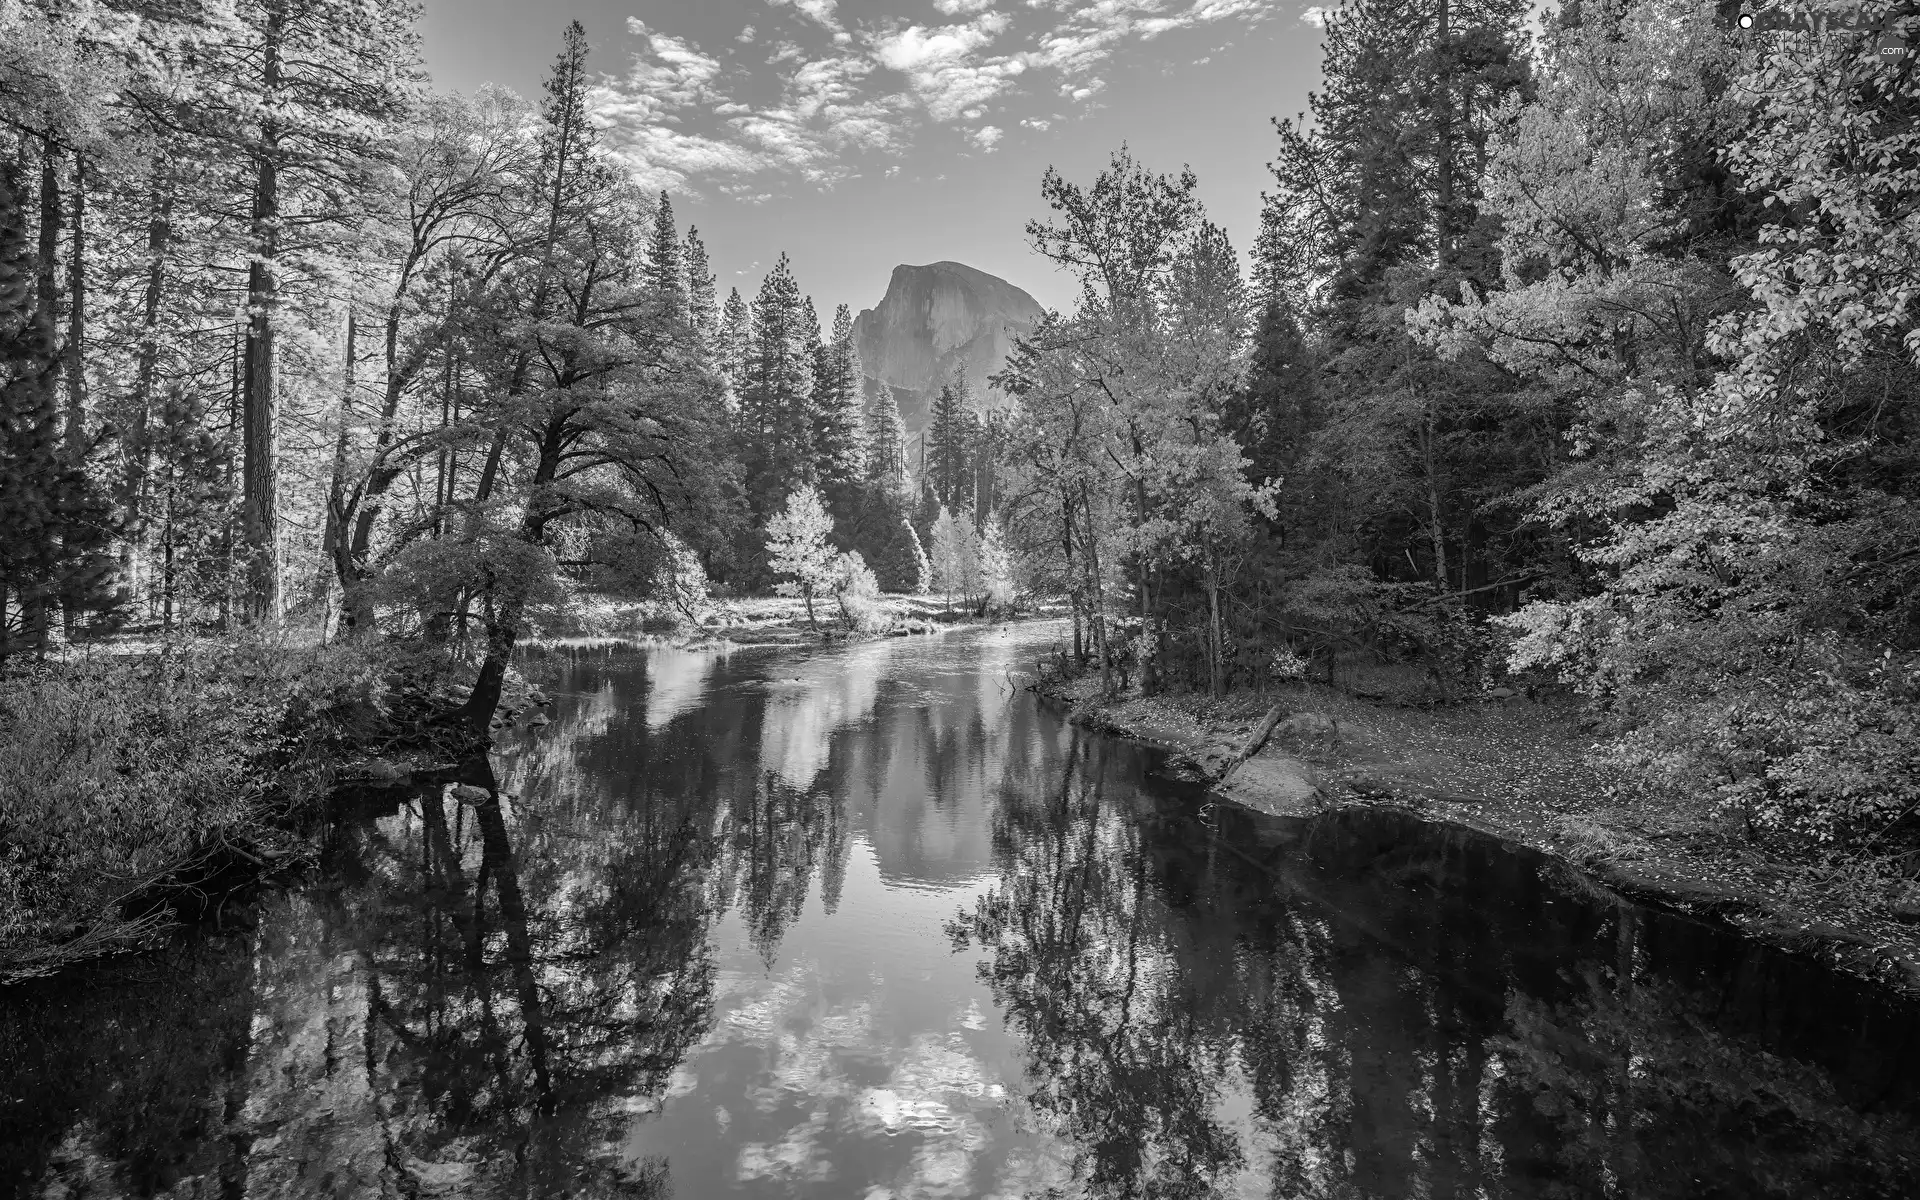 California, The United States, Yosemite National Park, autumn, viewes, Leaf, Merced River, trees, Mountains